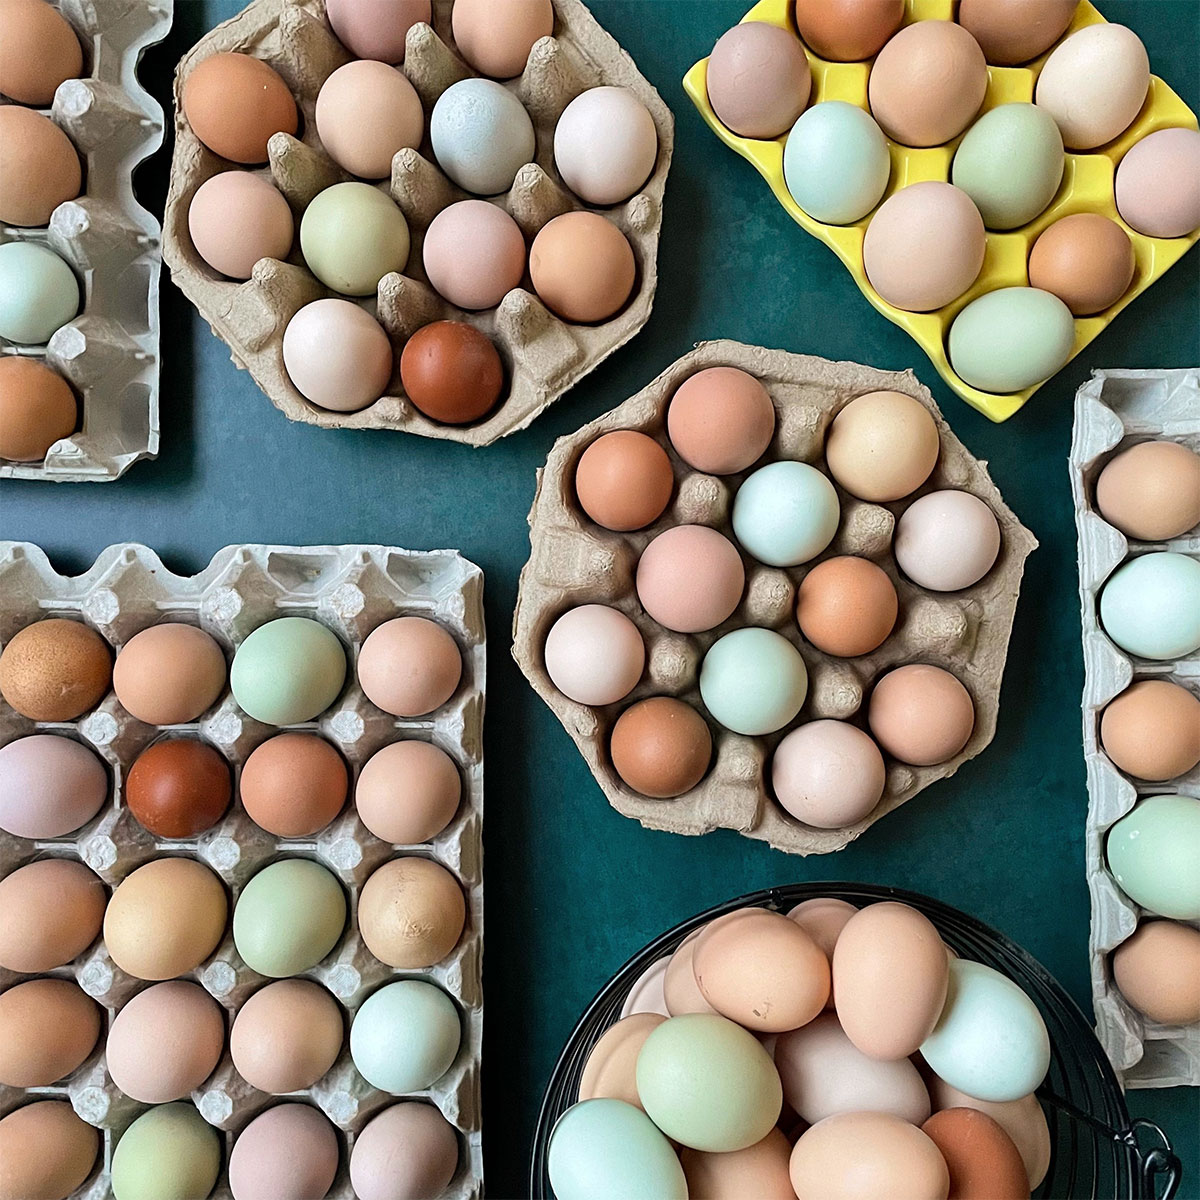 Chicken Breeds for a Colorful Basket of Eggs + Top 6 Breeds by Egg Color